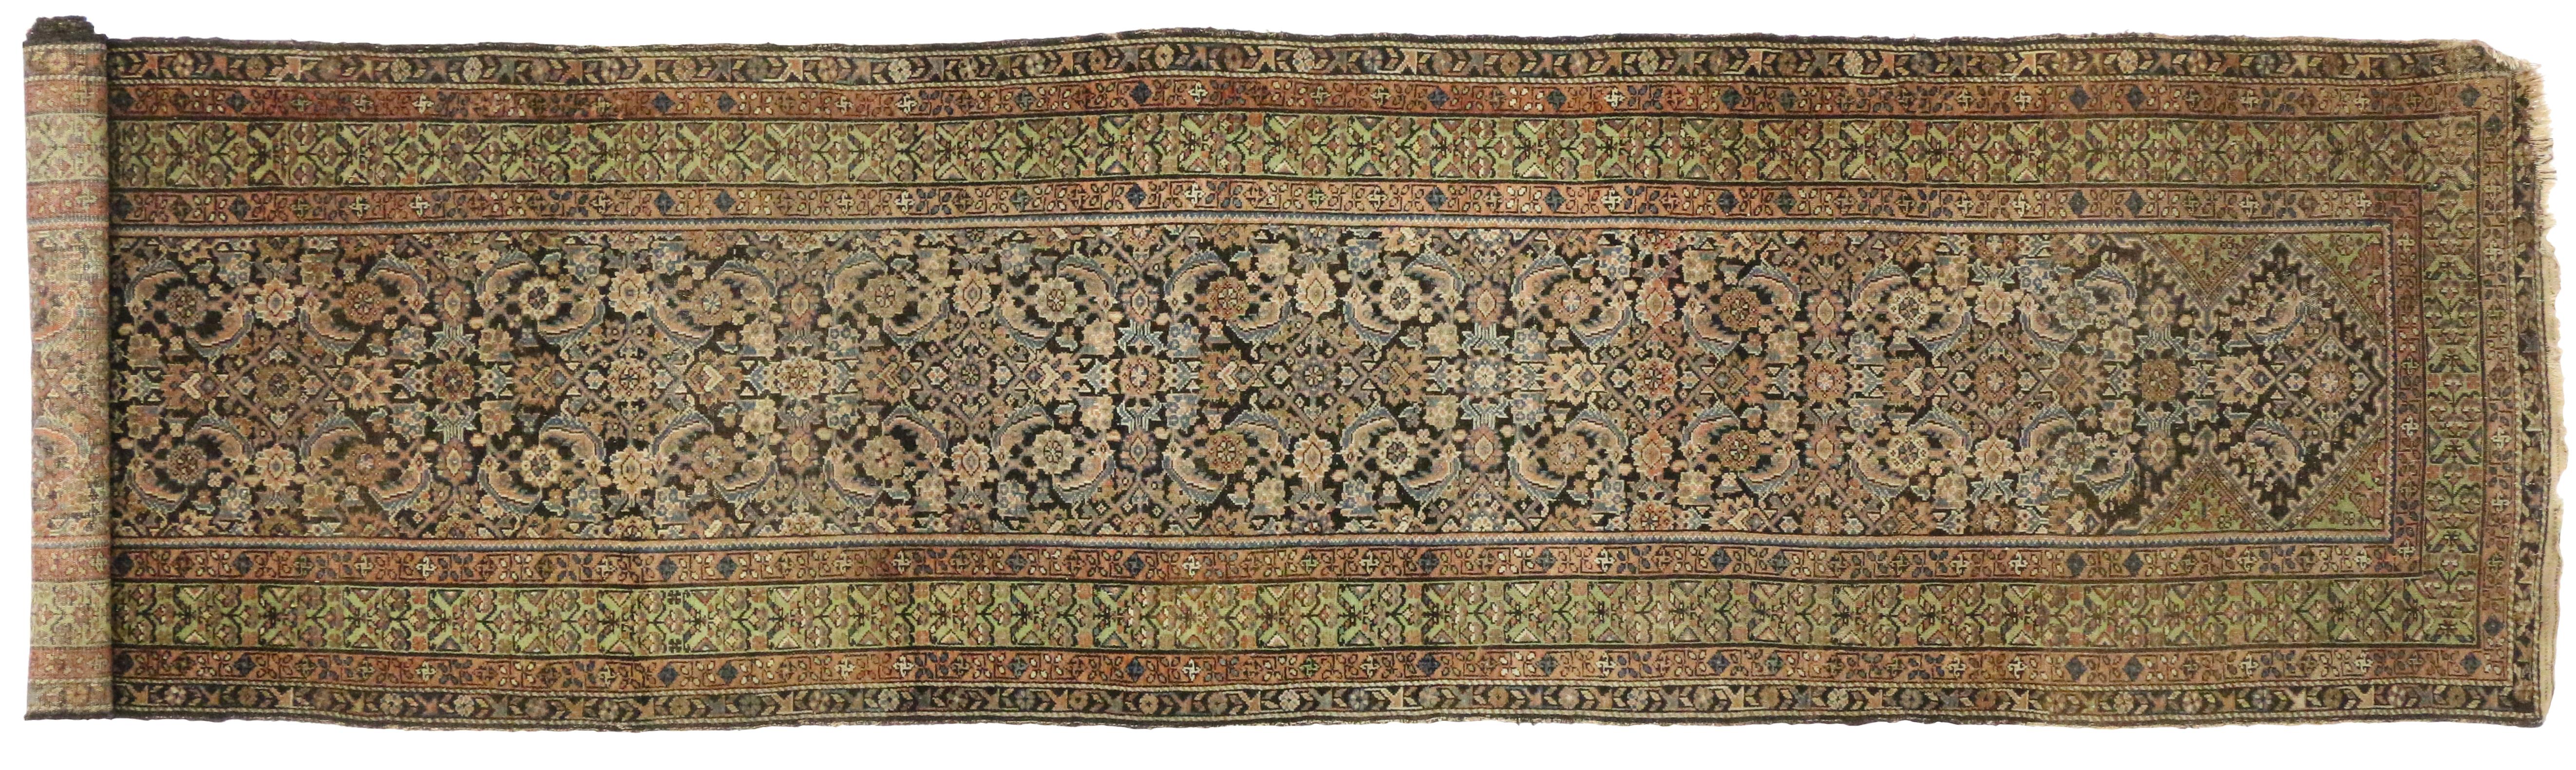 Antique Persian Malayer Rug Carpet Runner For Sale 7